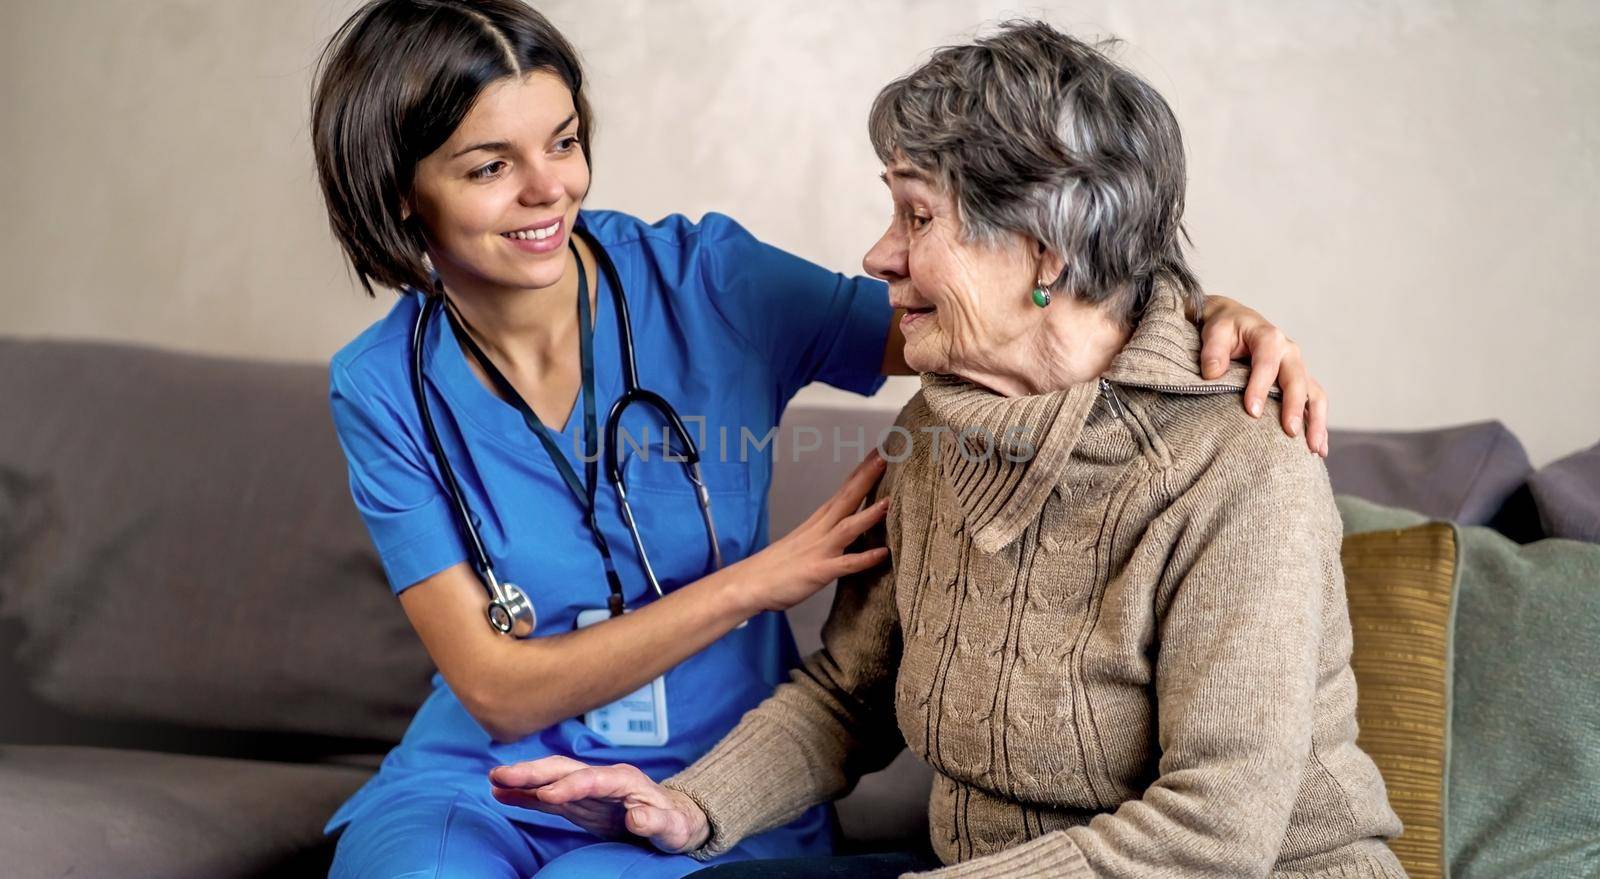 A young nurse takes care of an elderly 80-year-old woman at home, holds her hands . Happy retired woman and trust between doctor and patient. Medicine and healthcare.